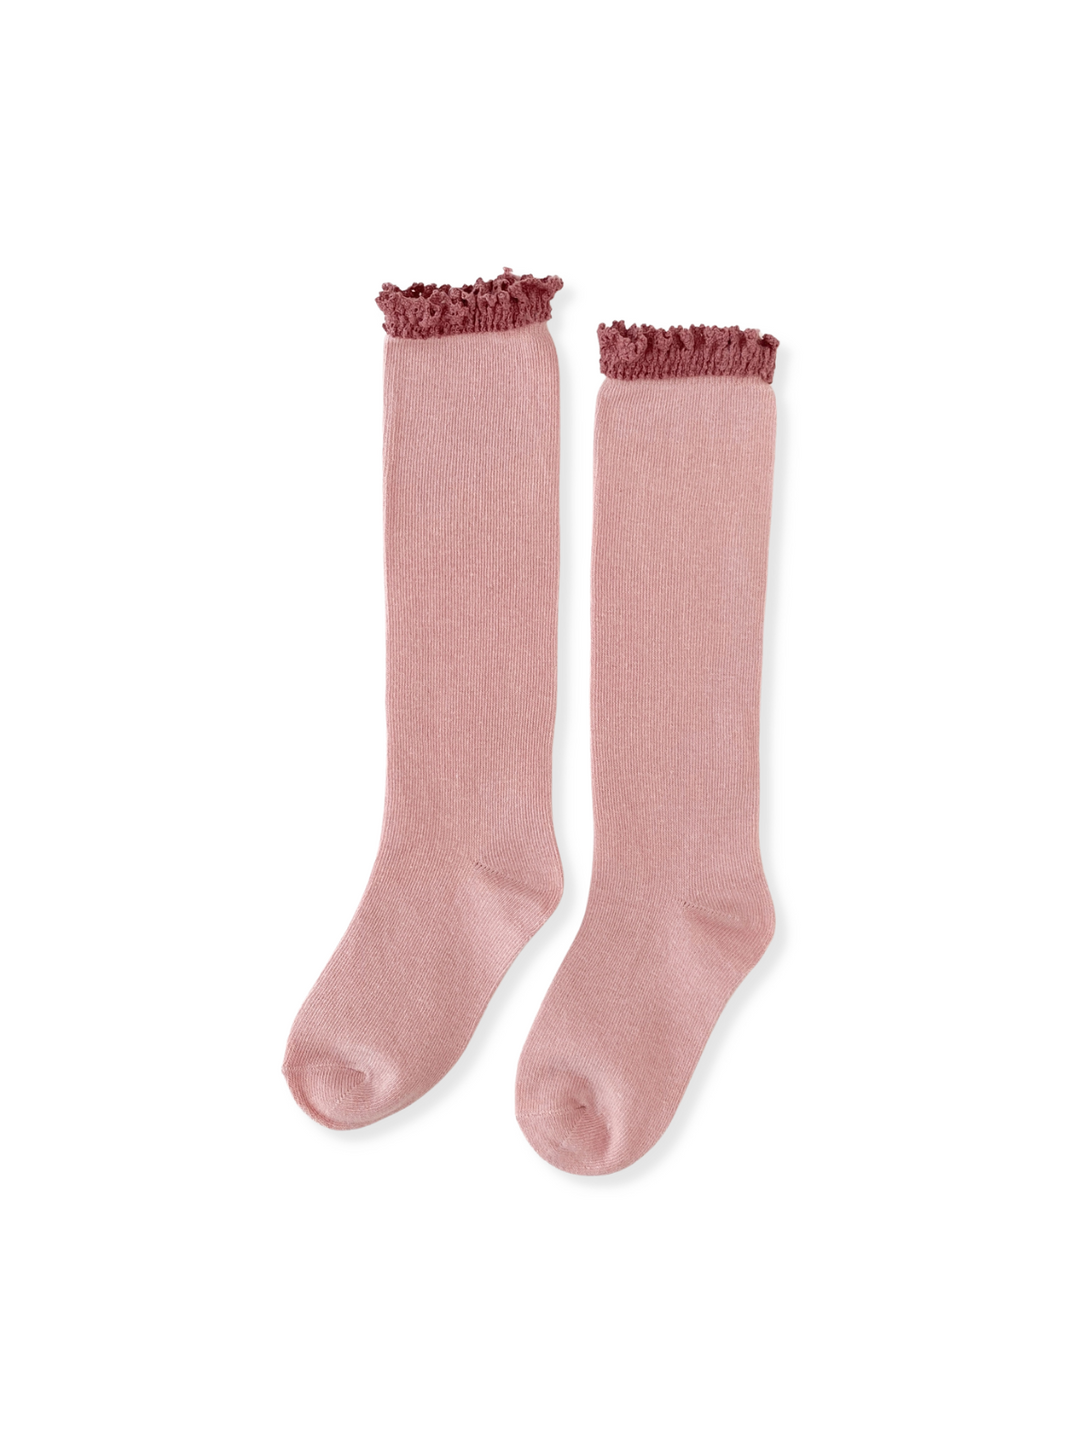 Lace Top Knee High Socks - Blush | Little Stocking Co.